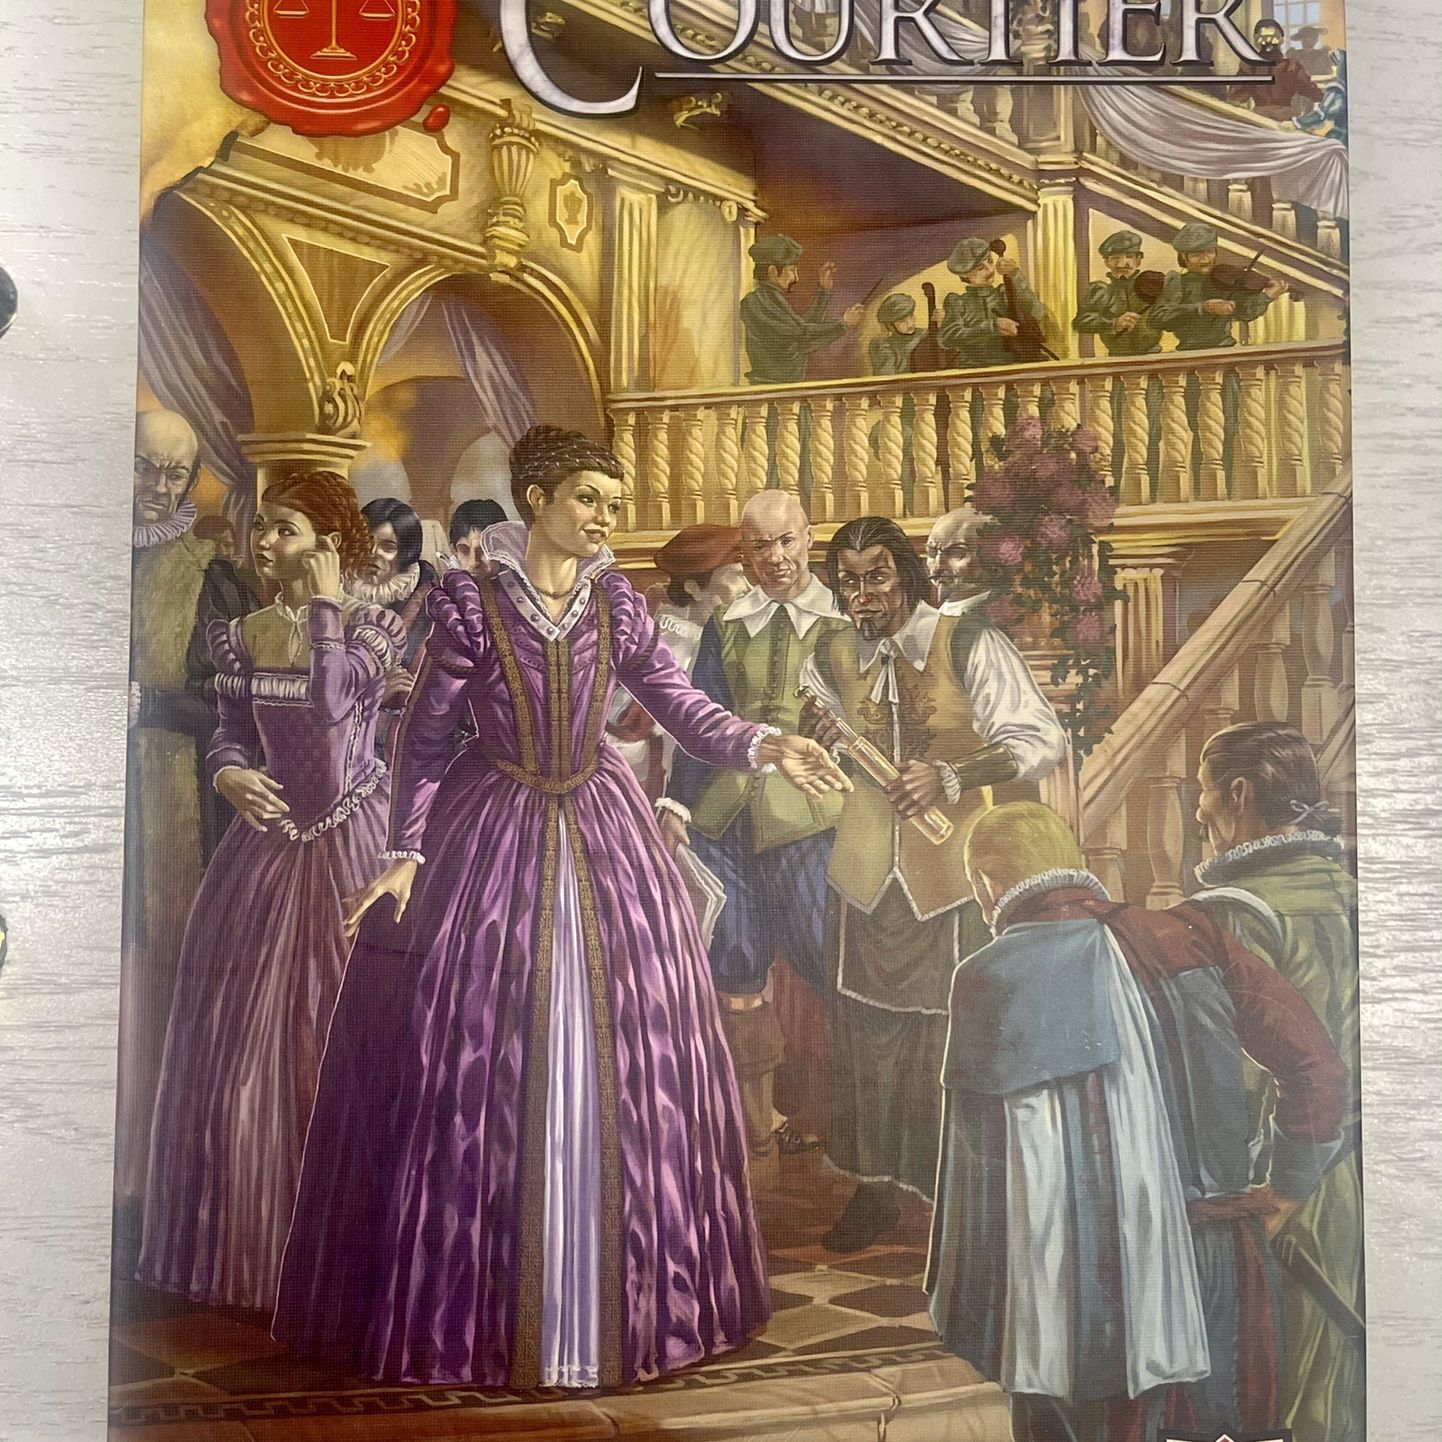 Courtier Board Game